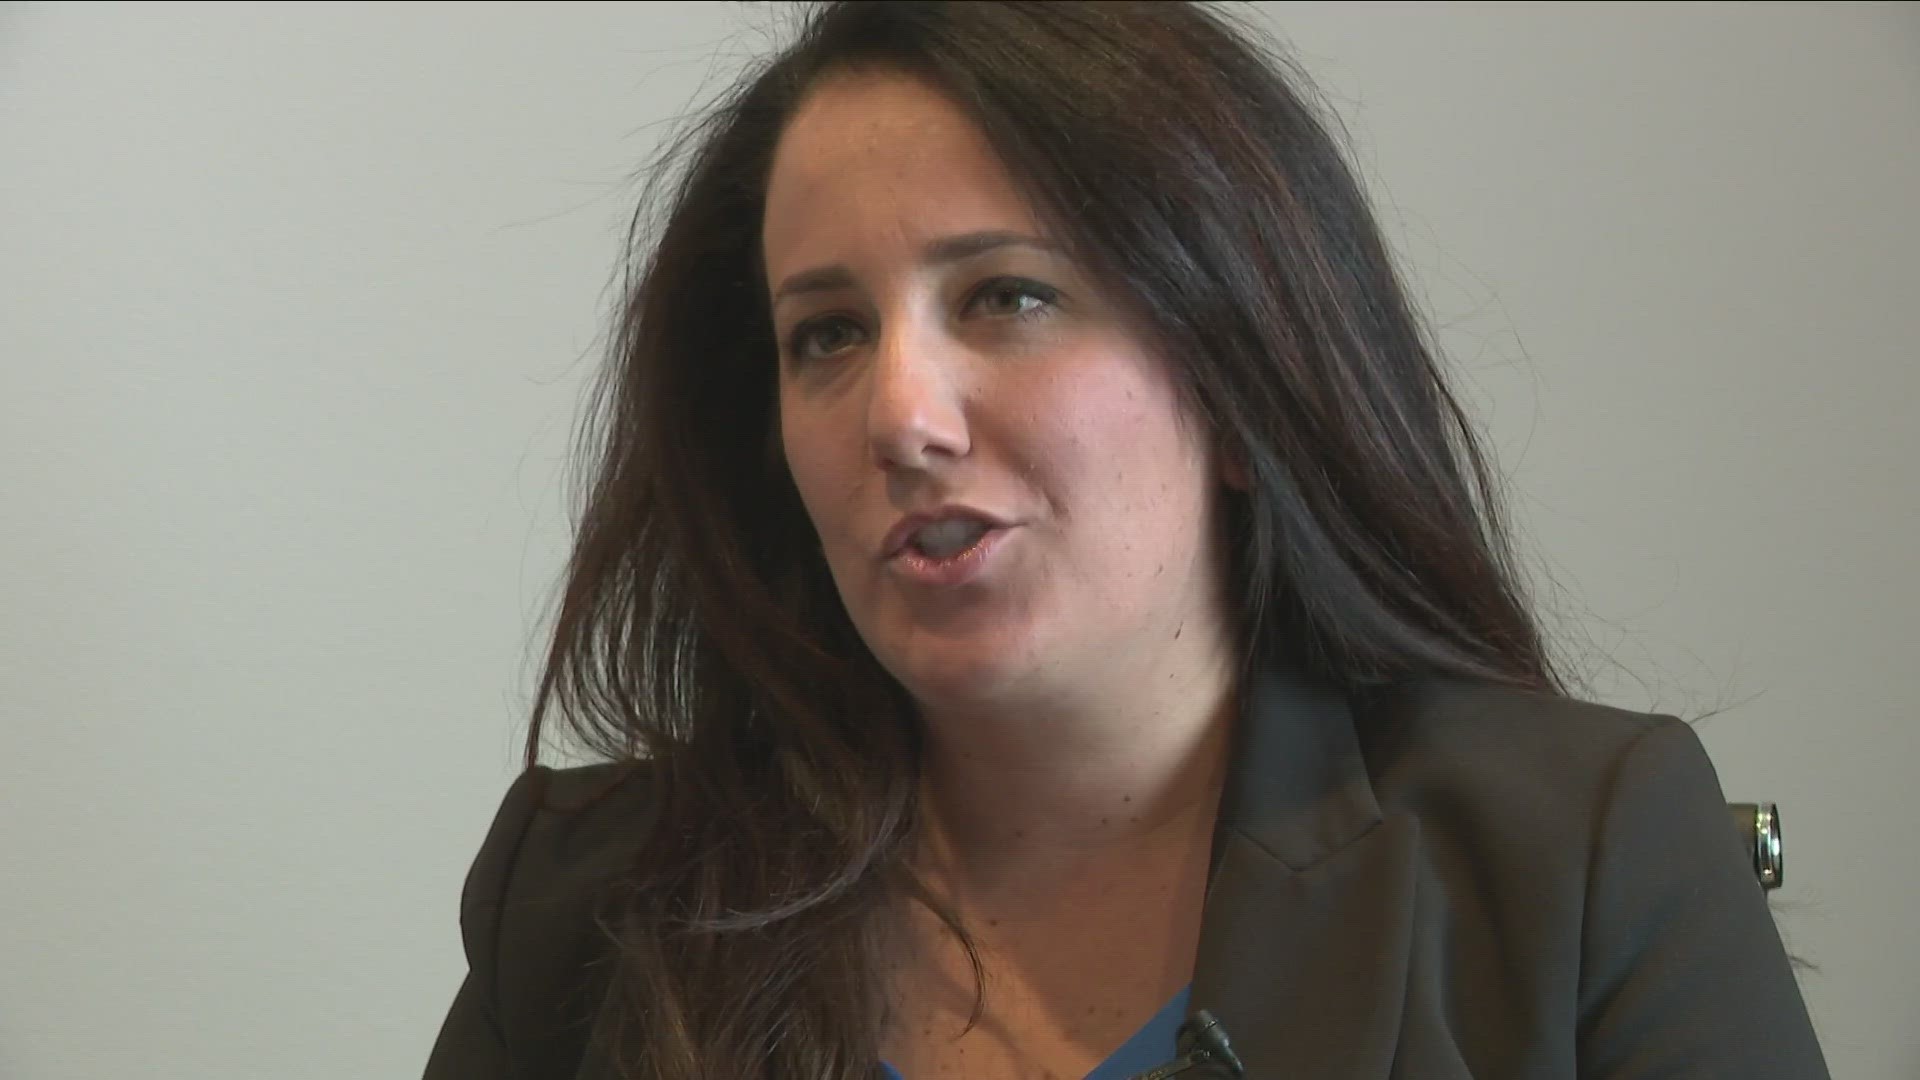 Chrissy Casillio talks about why she wants to be the next Erie County Executive